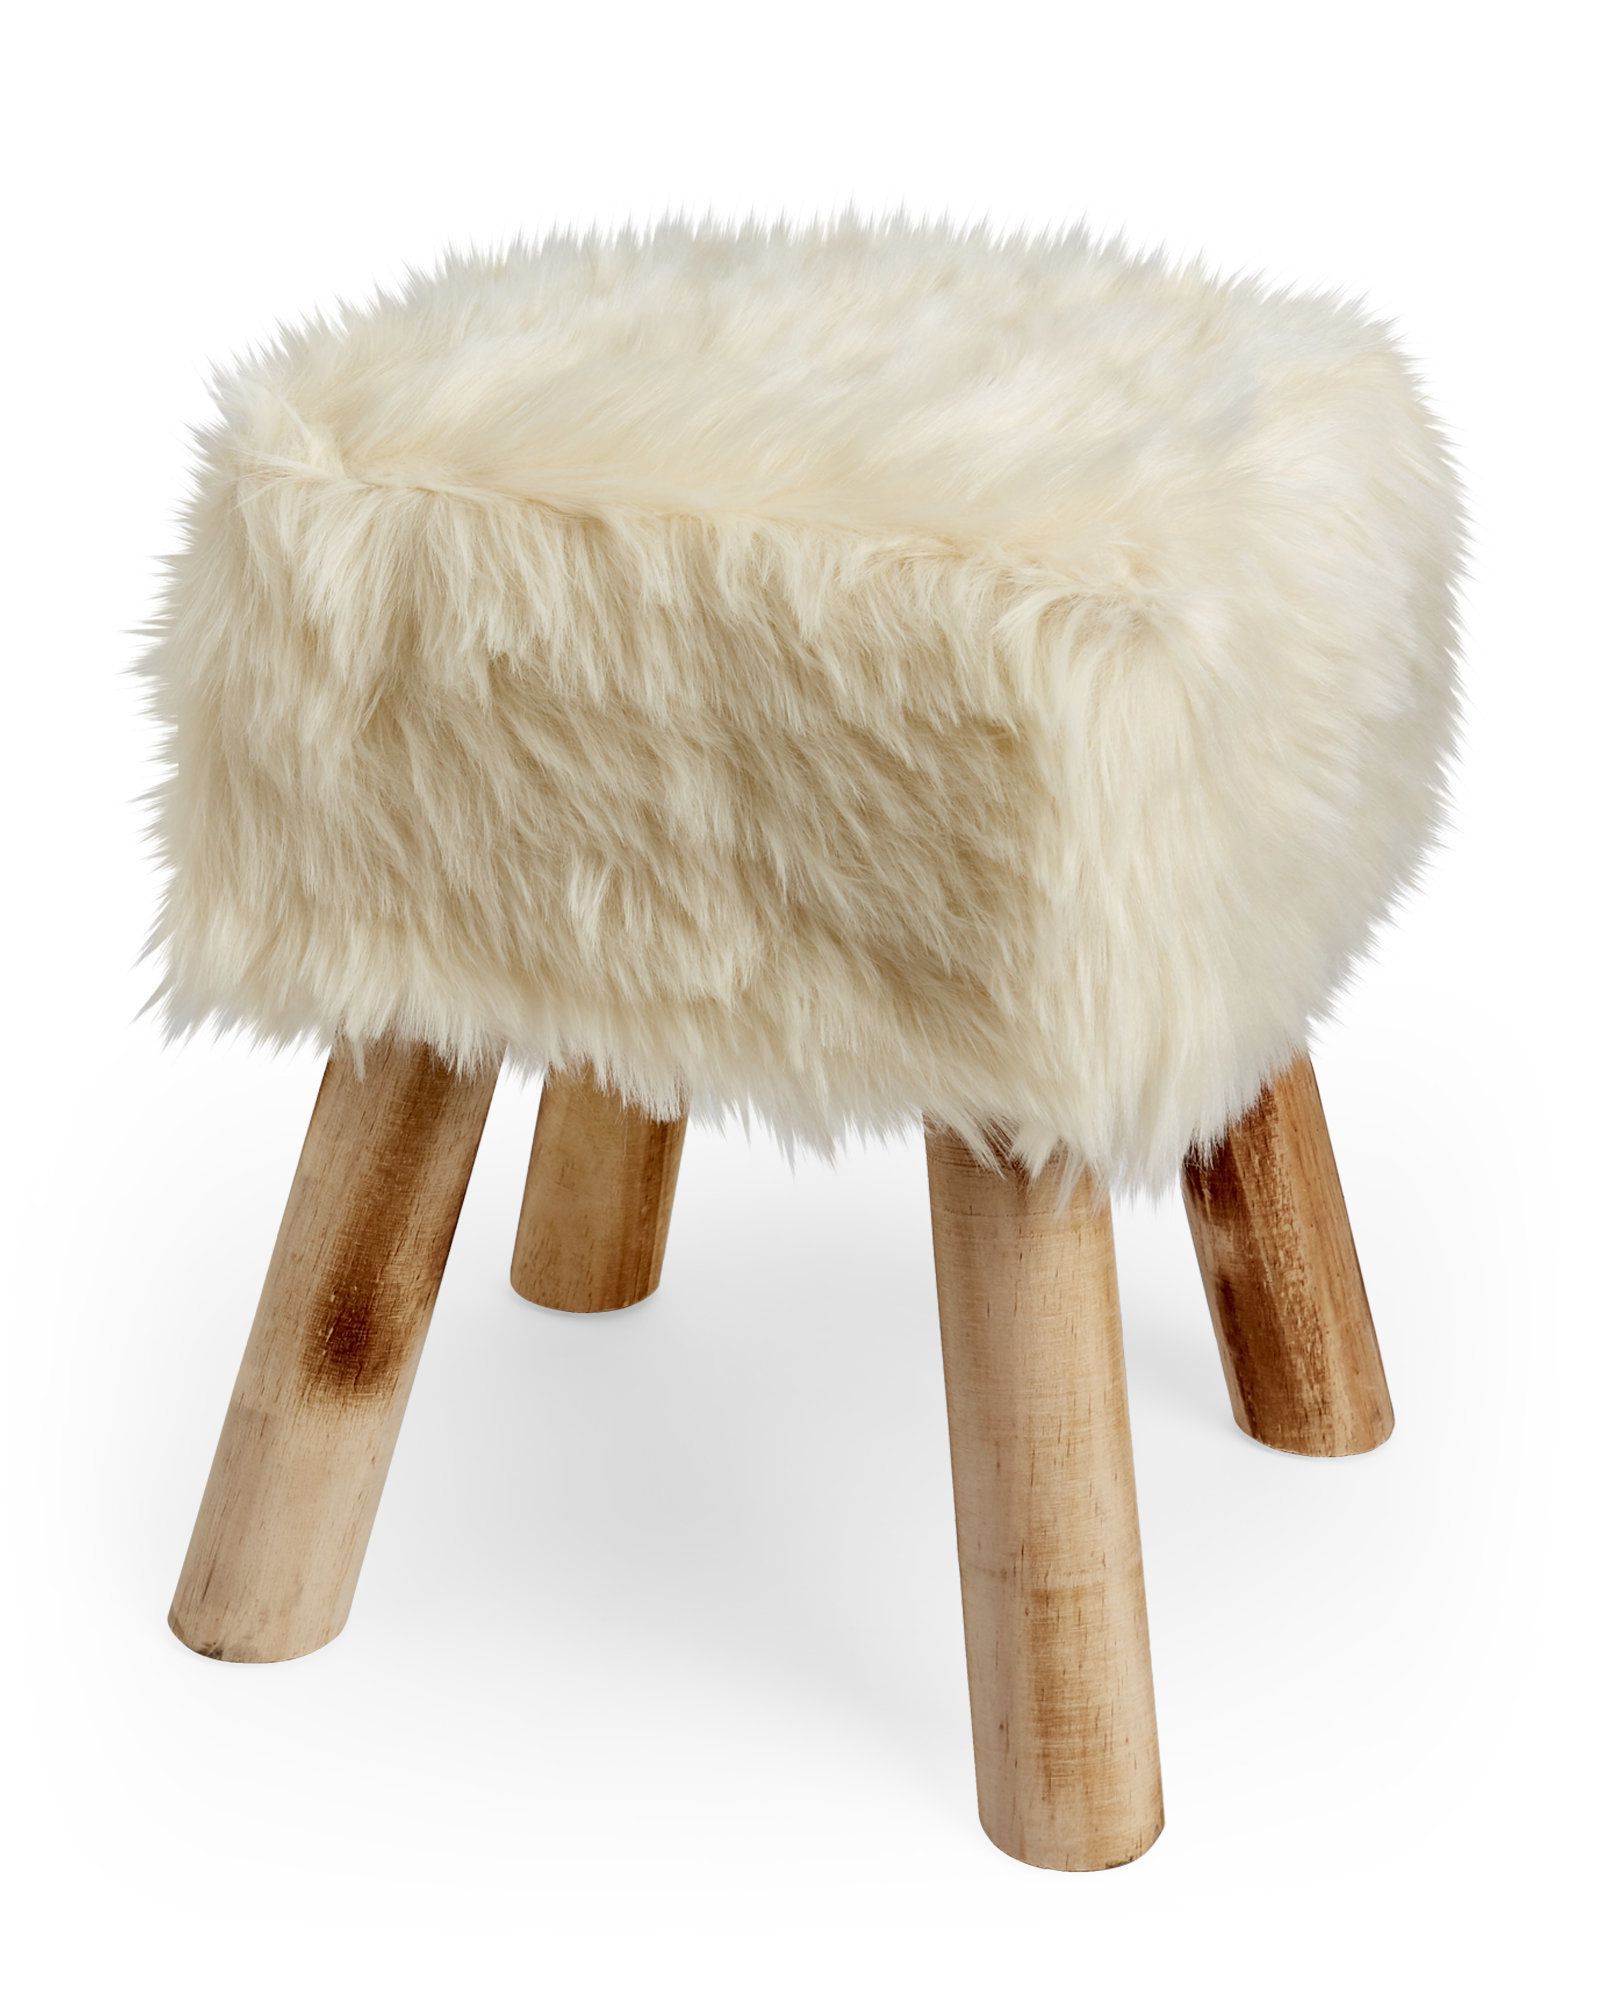 Urban Shop, Ottoman, Faux Fur Pertaining To Latest White Faux Fur And Gold Metal Ottomans (View 5 of 10)